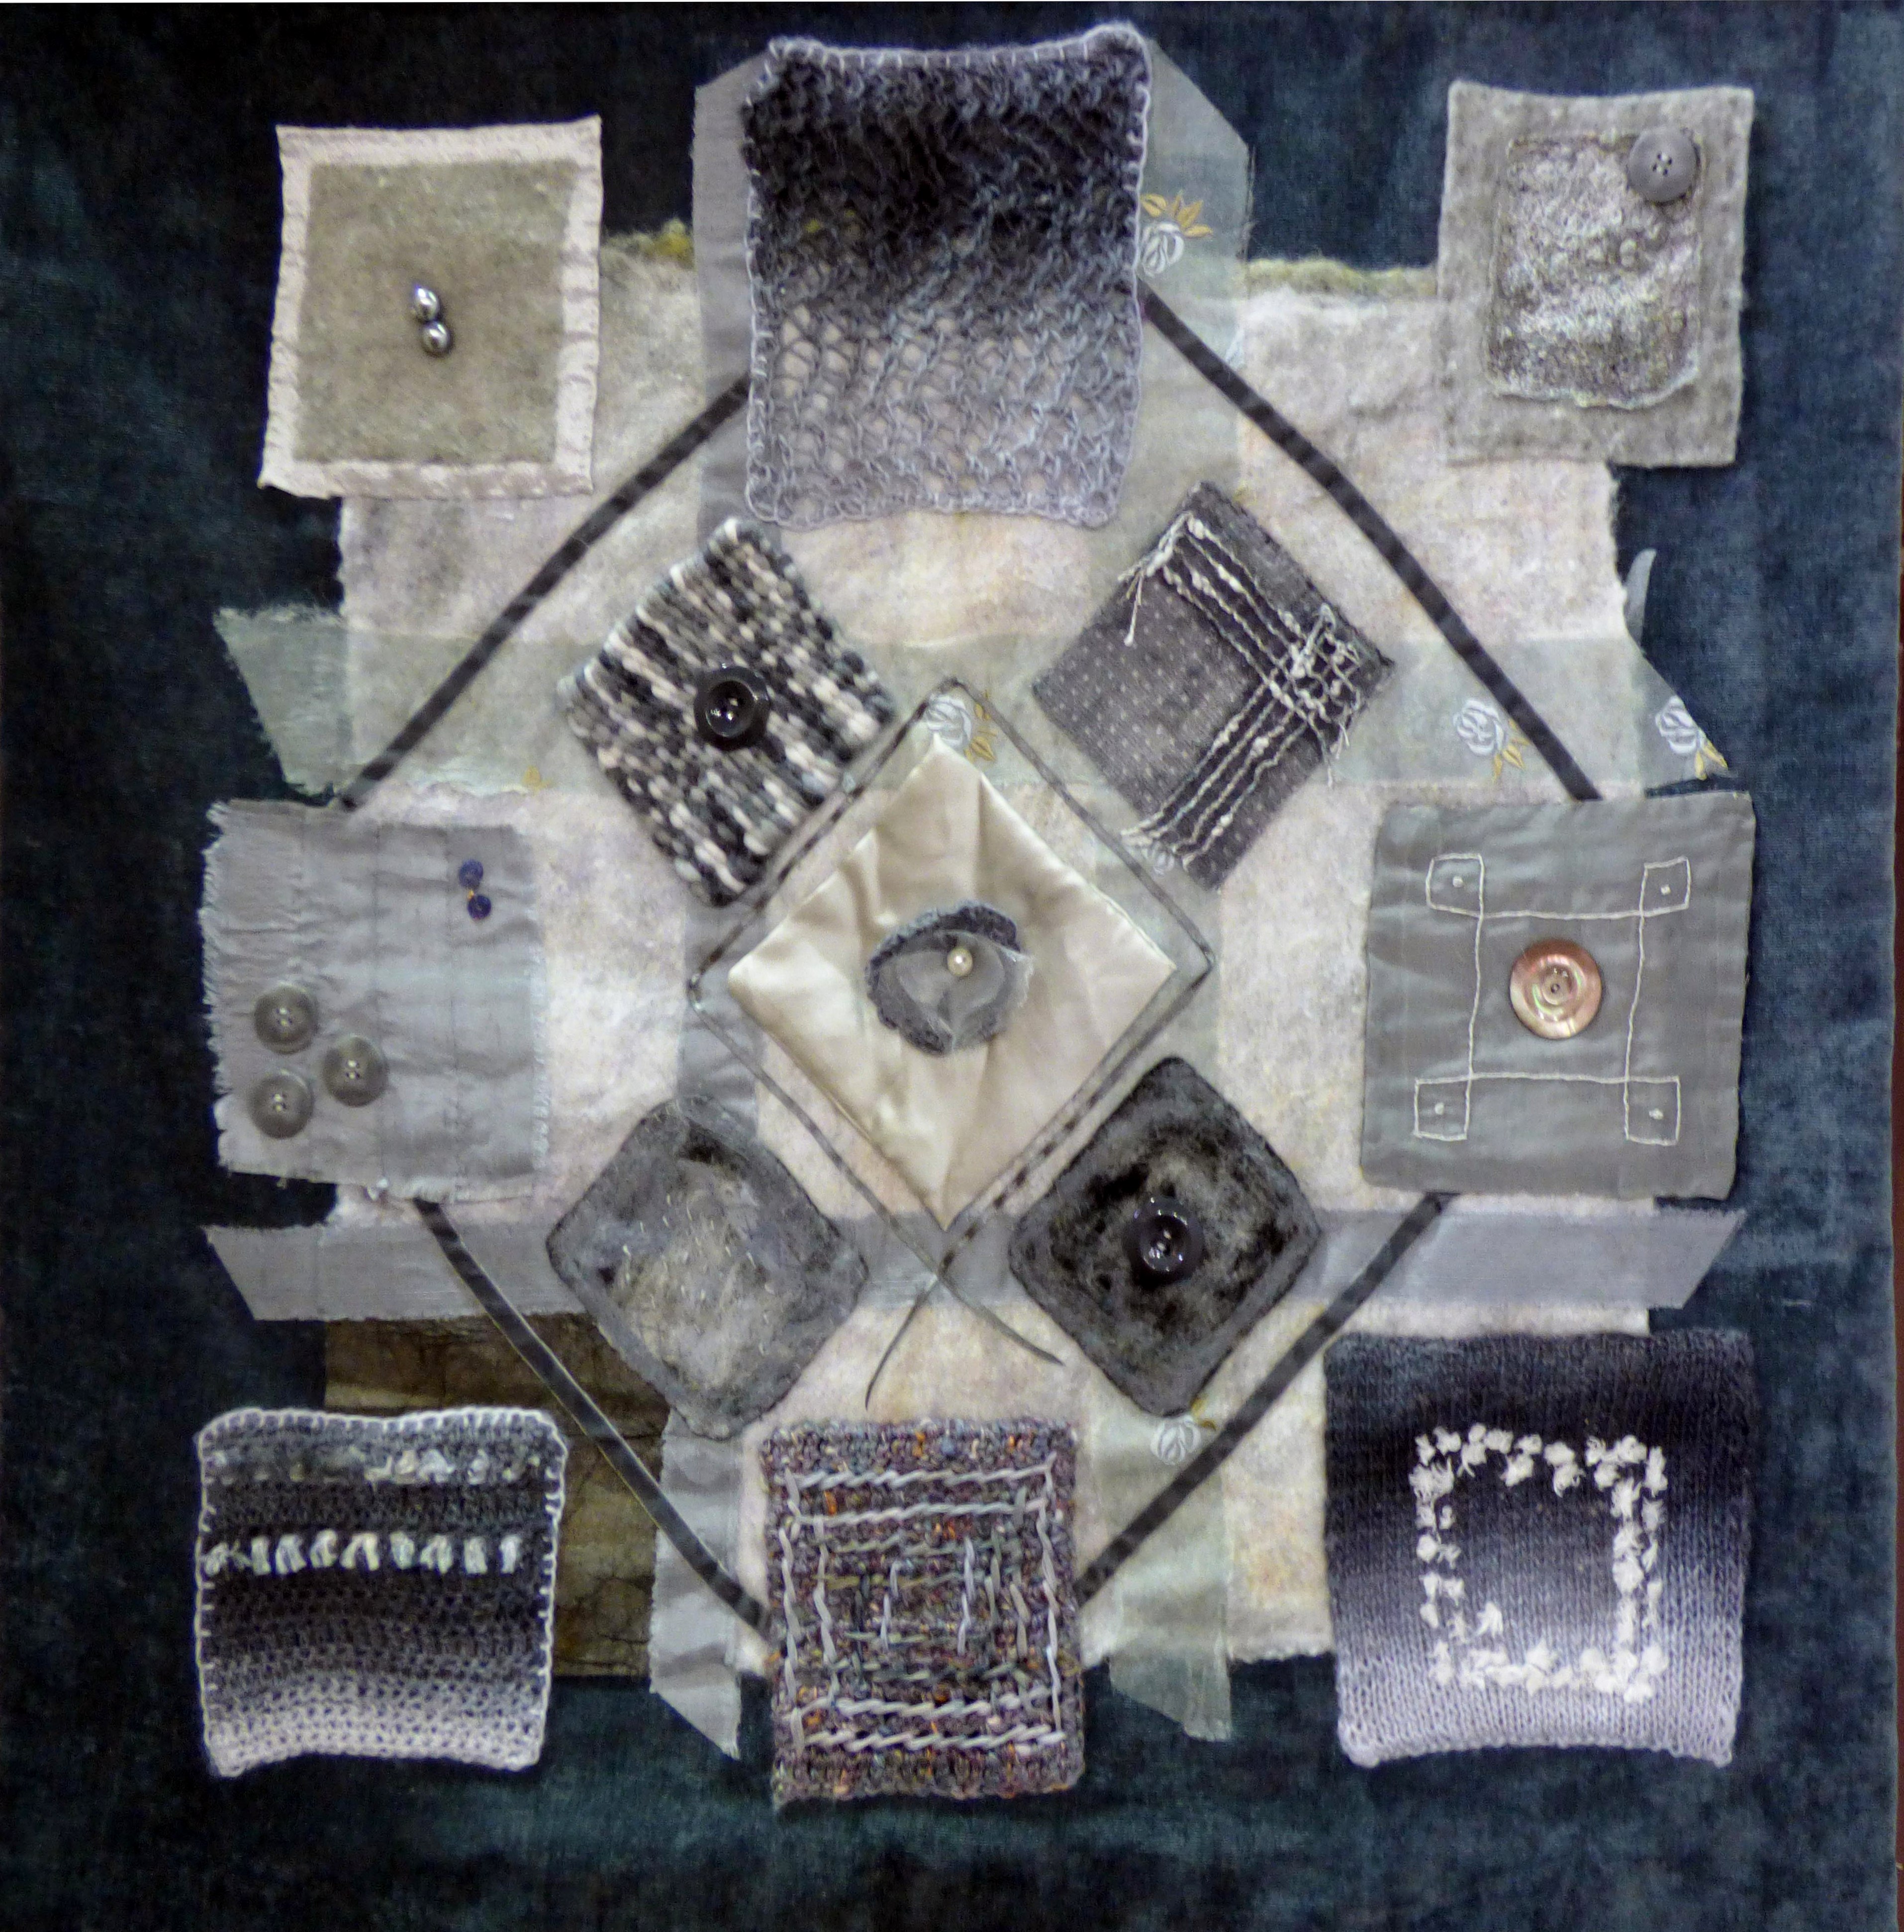 FIFTY SHADES OF GREY by Mary Sotheran, N.Wales EG, mixed media with hand & machine embroidery